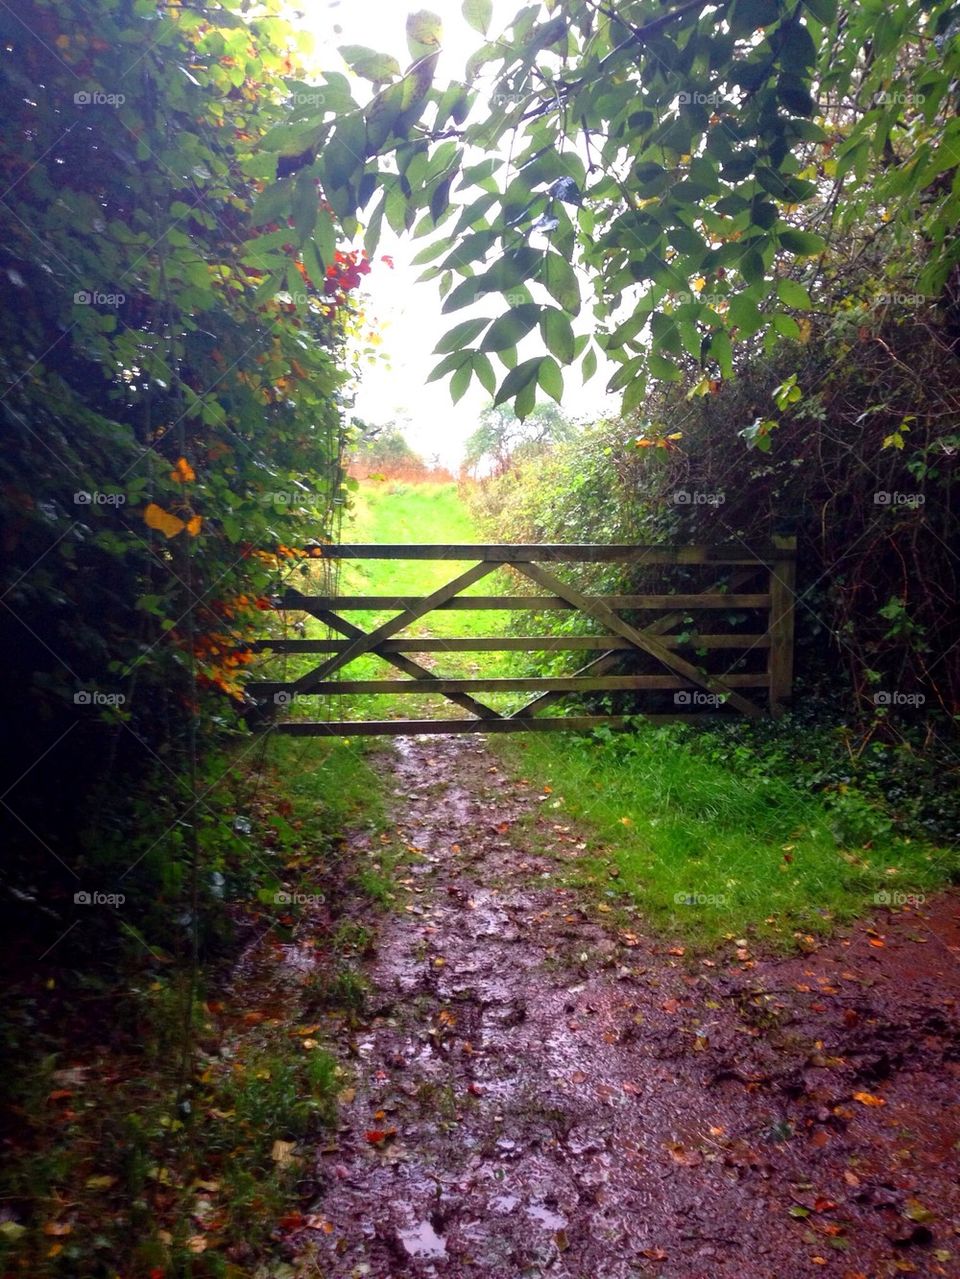 An English Country Gate